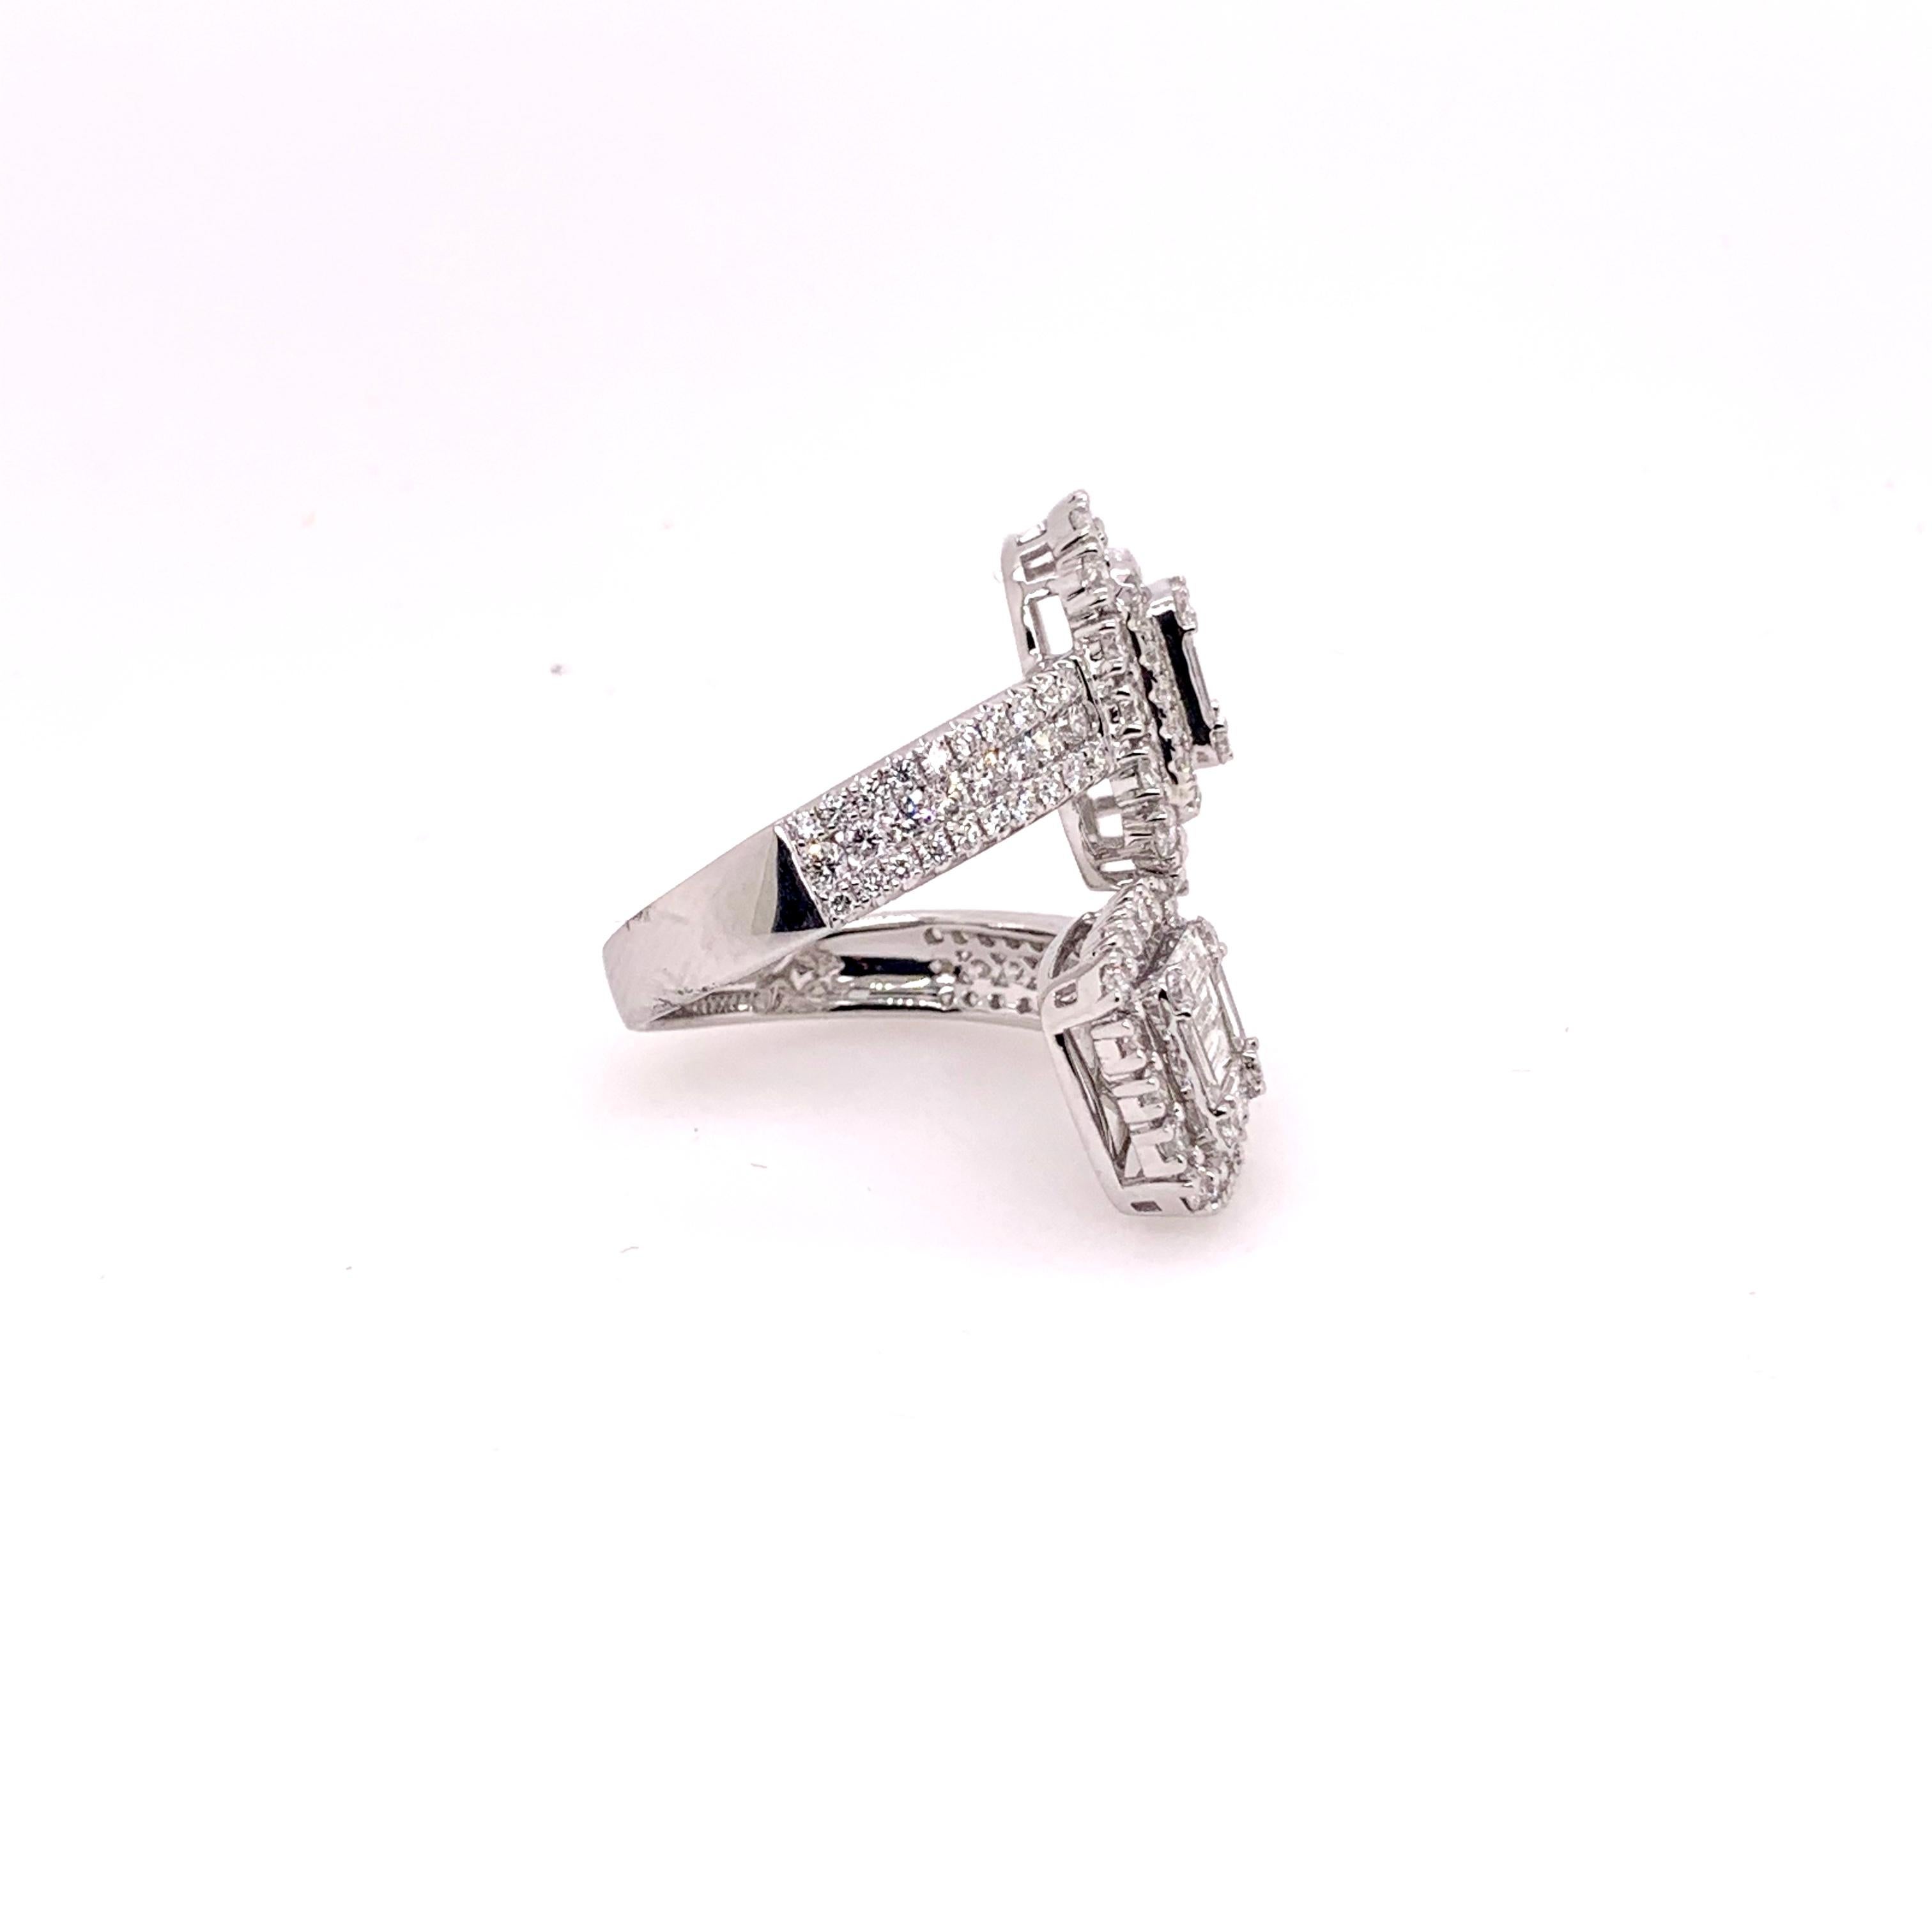 An unusual diamond bypass ring that will captivate everyone's attention.   Uniquely made in 18k white gold, it has a total of 3.46 cts of round diamonds and diamond baguettes.  This statement piece will be thoroughly enjoyed in any jewelry